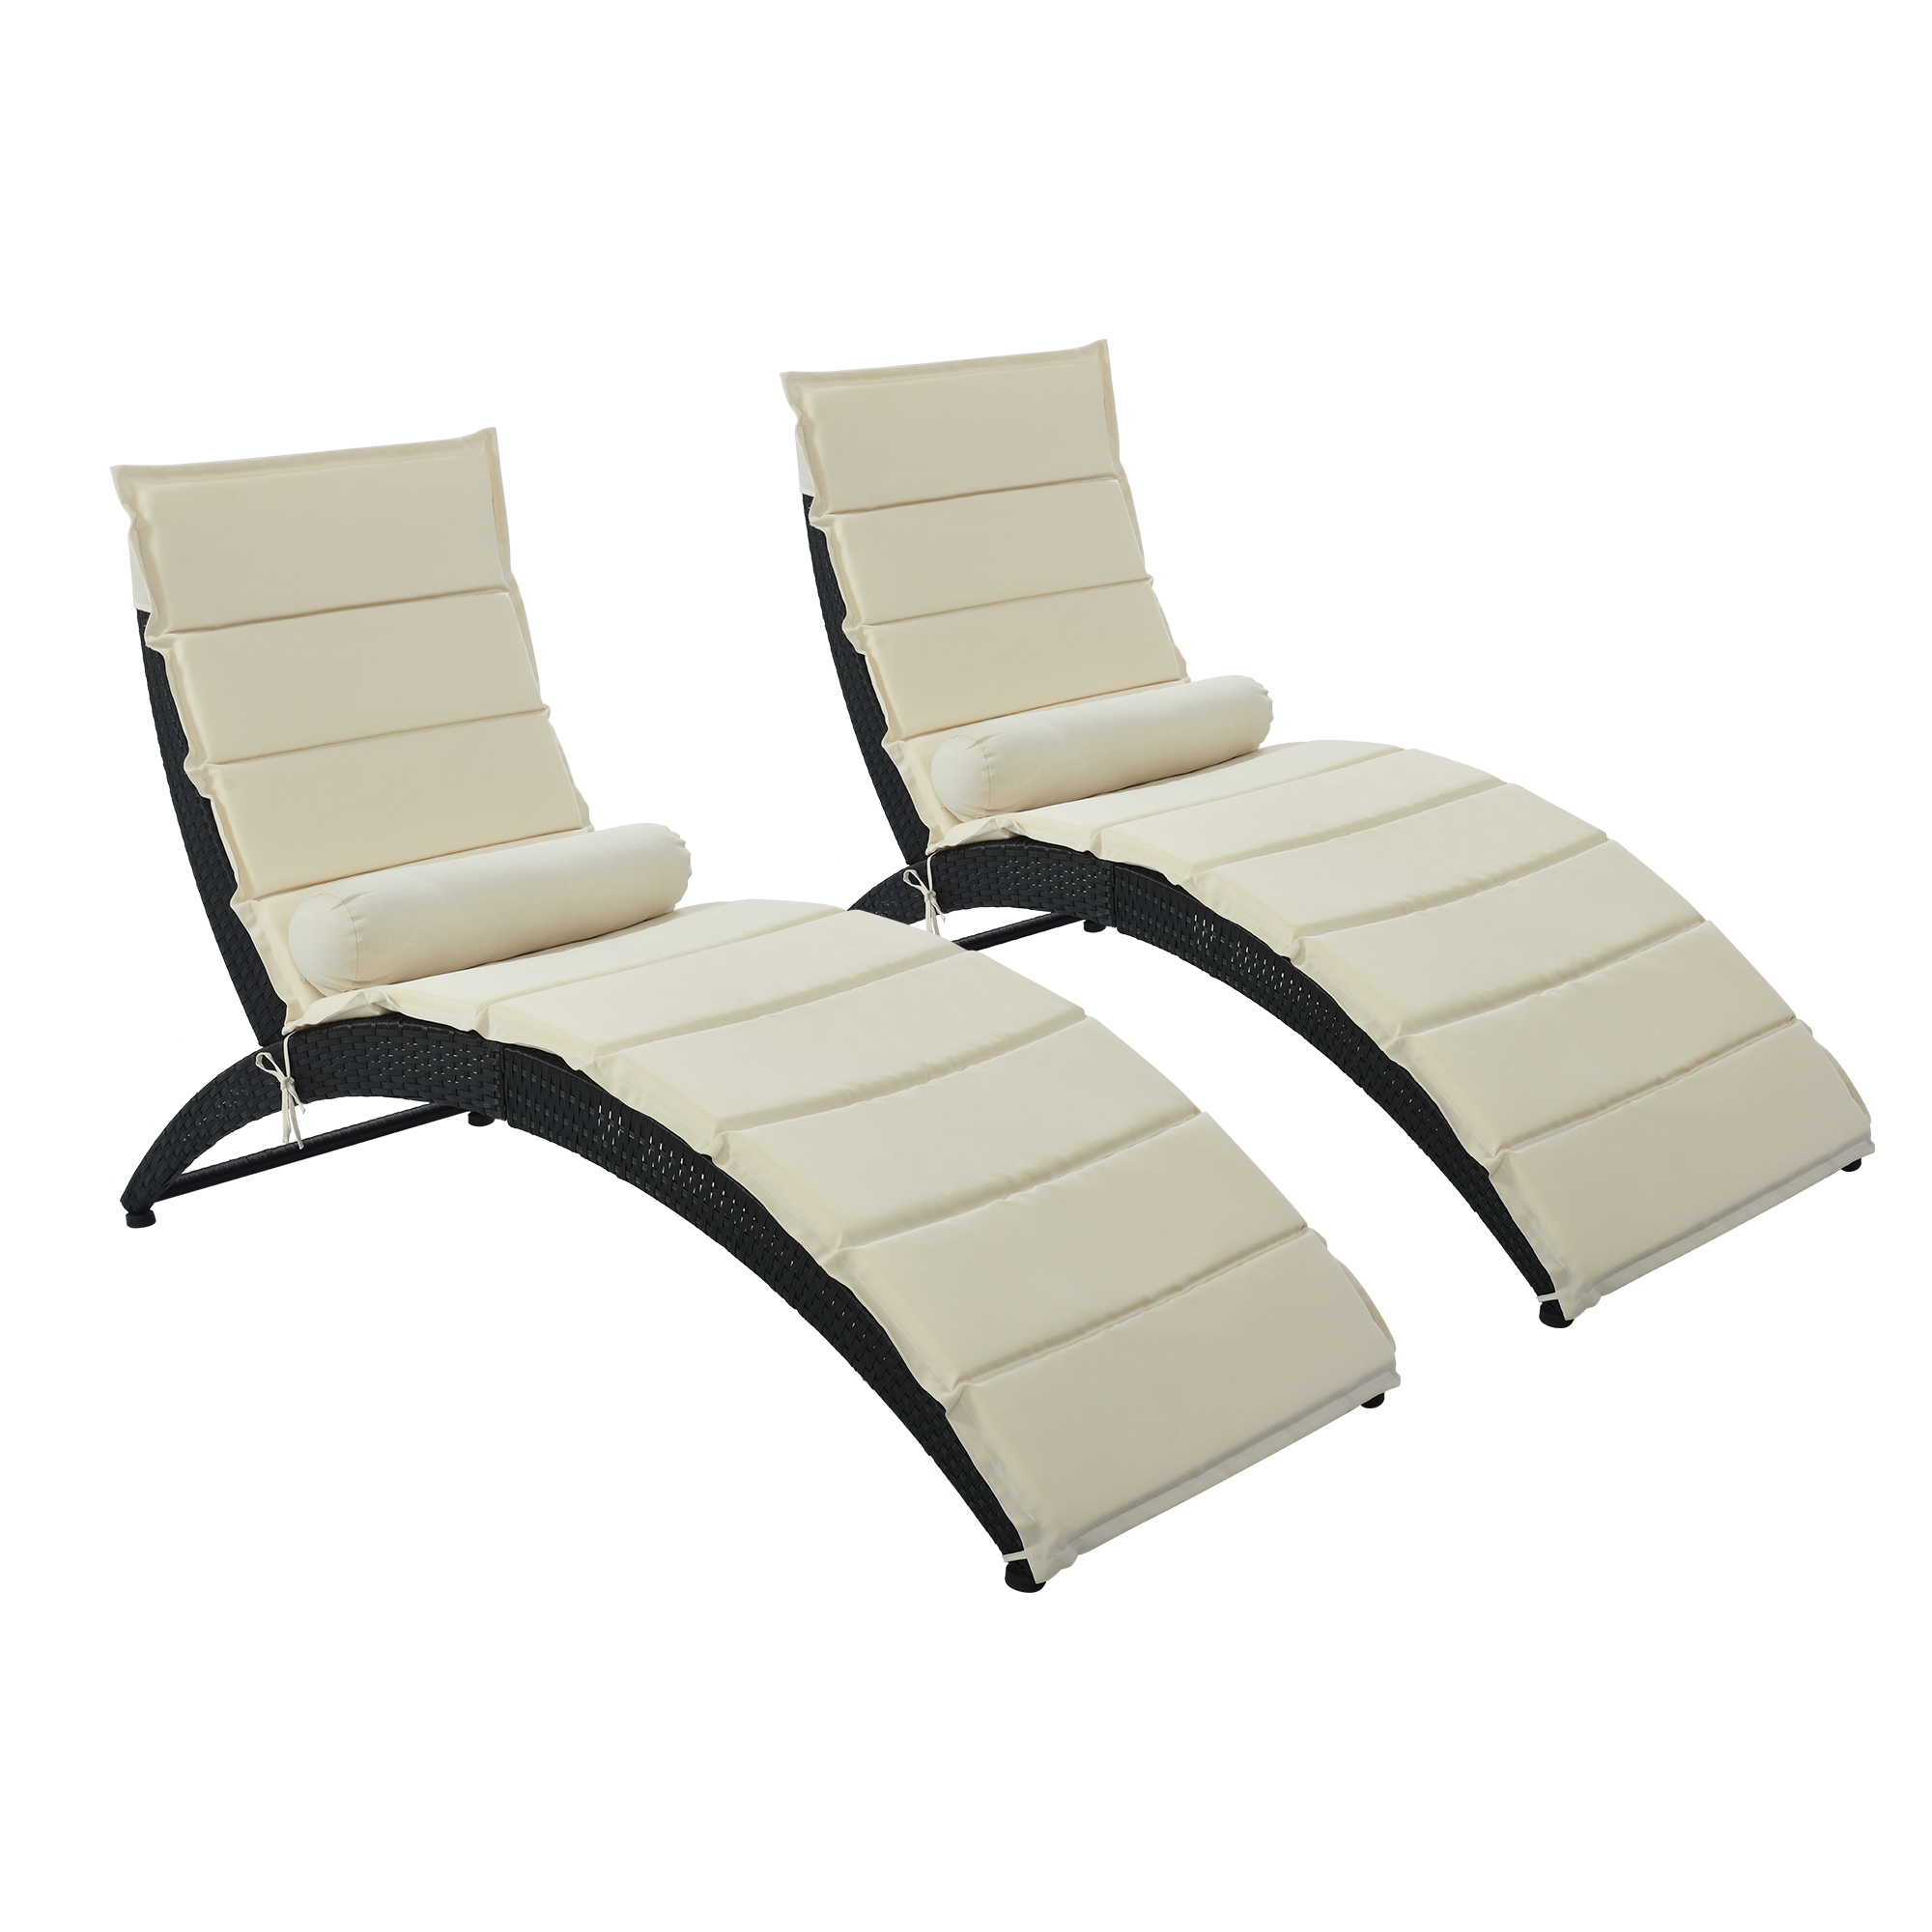 2 Pcs Patio Wicker Foldable Chaise Lounger with Removable Cushion and Bolster Pillow, Black Wicker and Beige Cushion (2 sets)